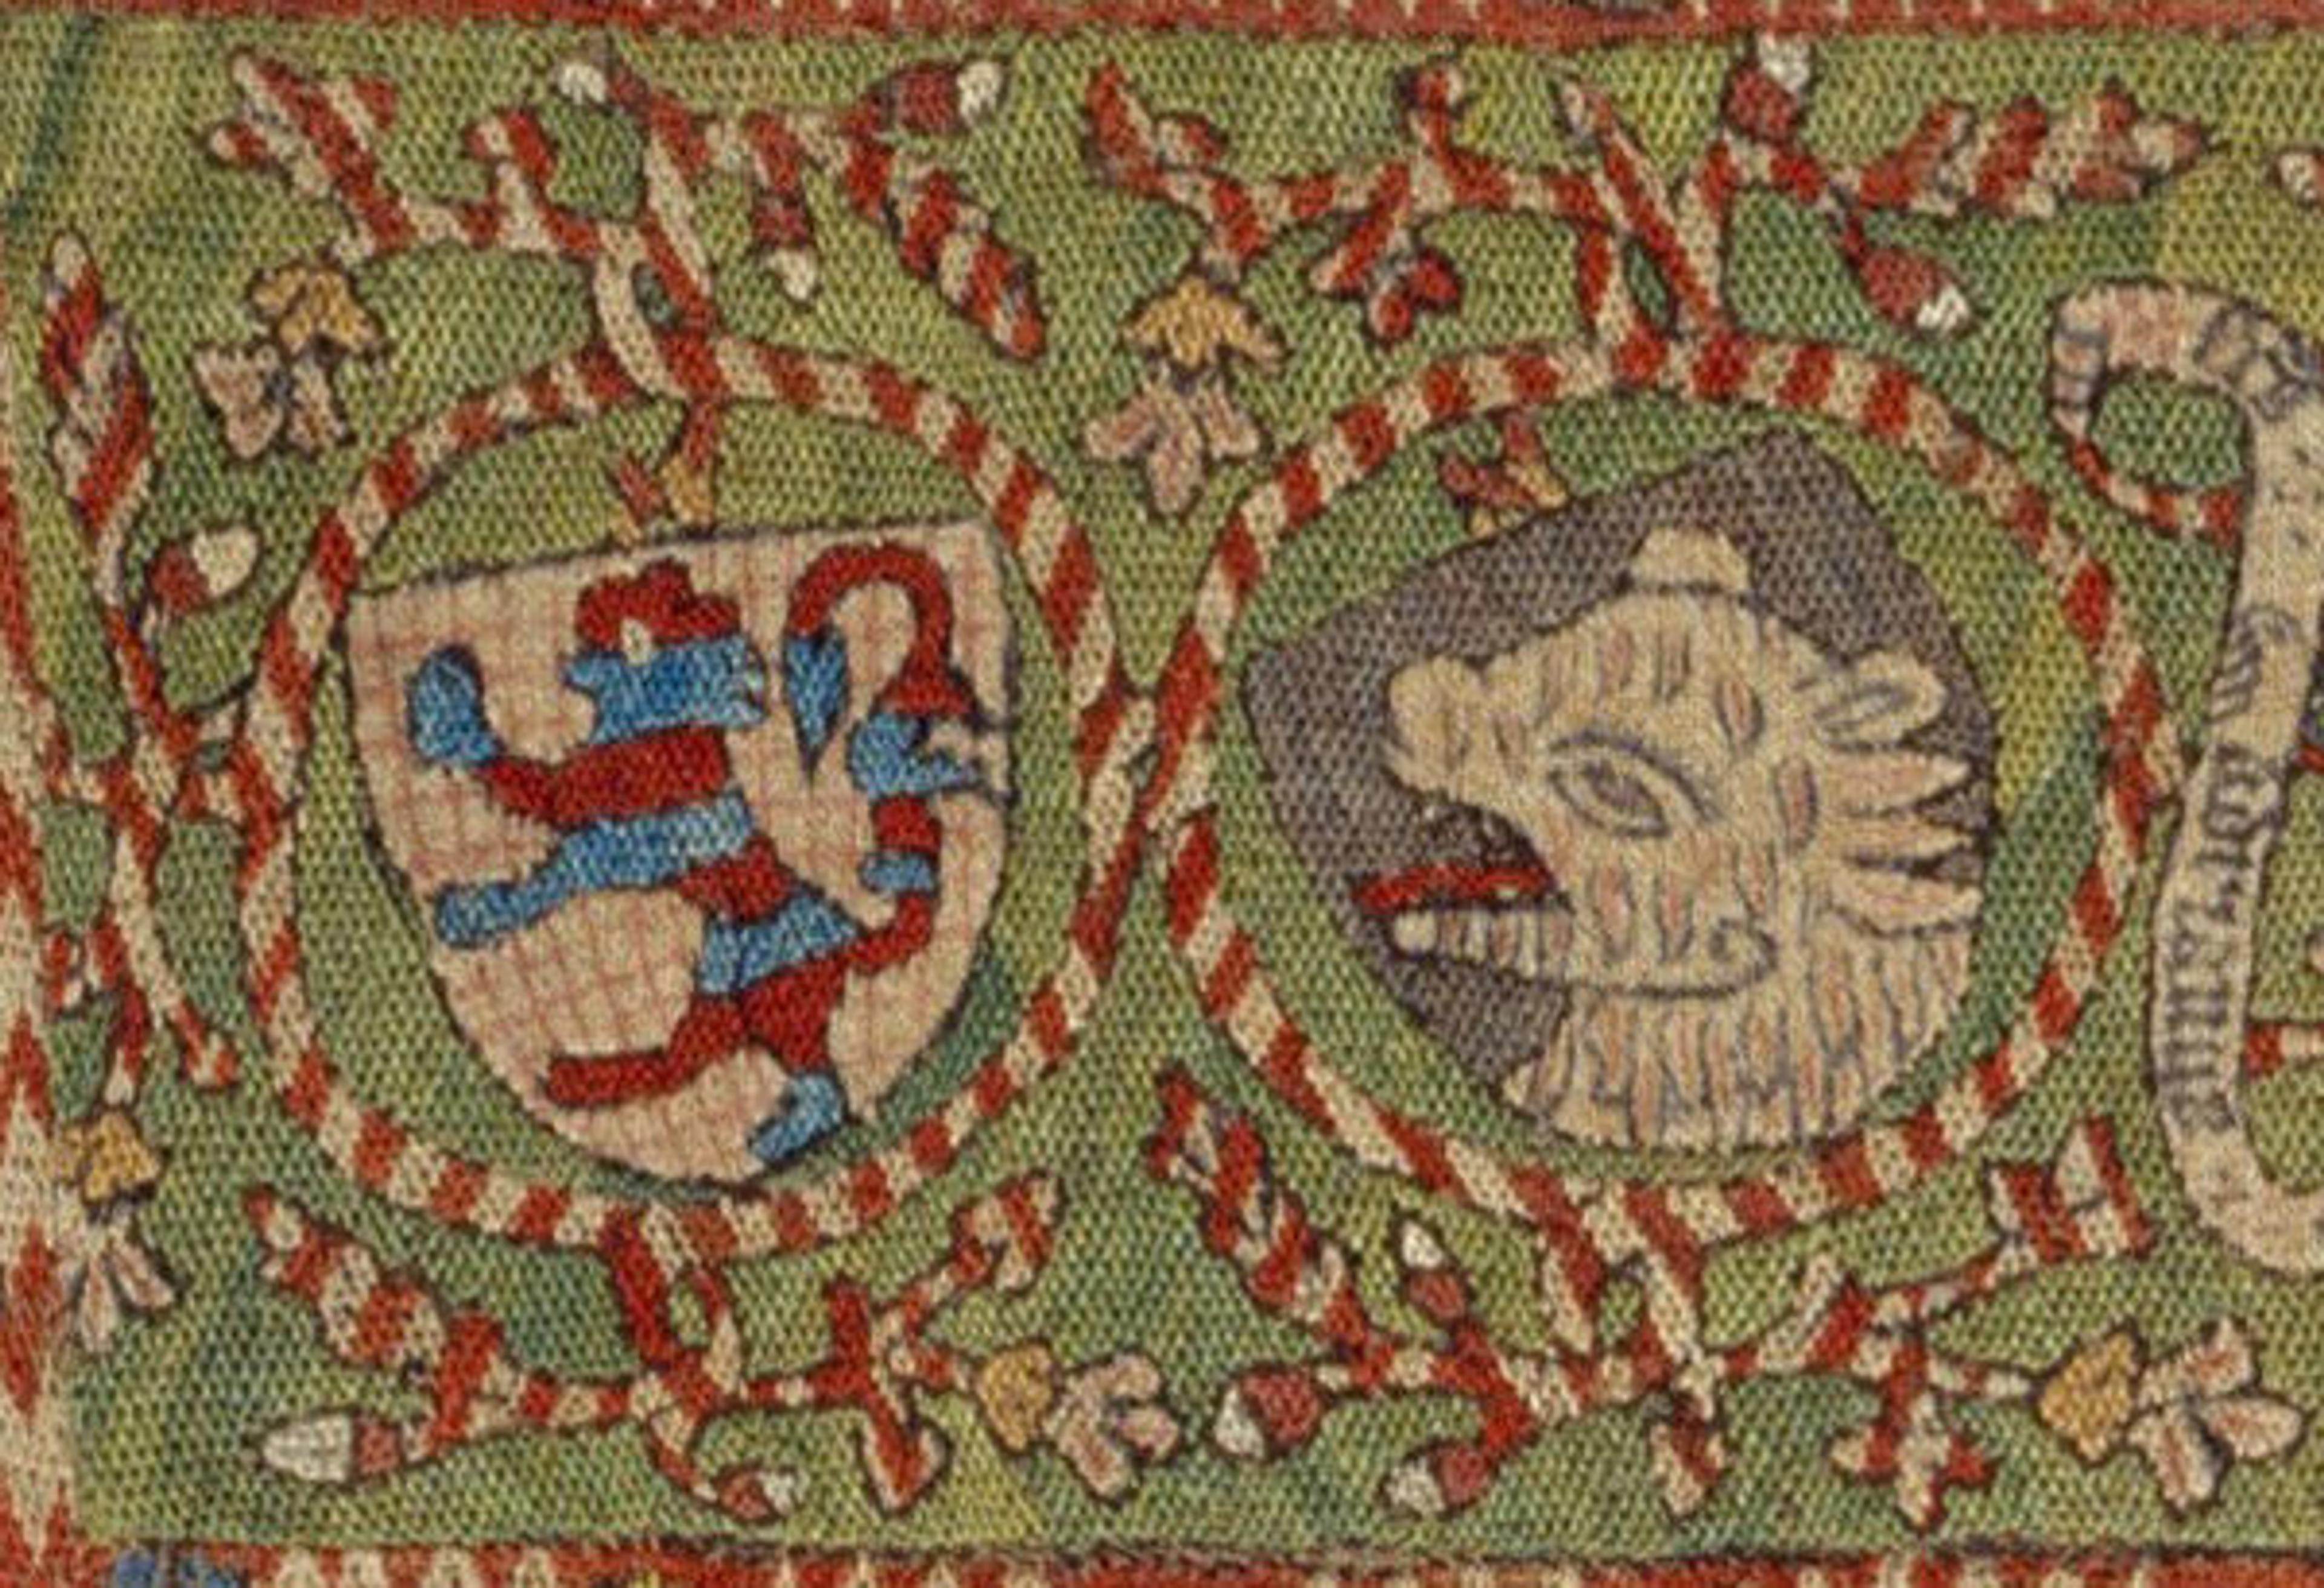  Embroidered hanging (detail), late 14th century. Made in probably Hildesheim, Lower Saxony, Germany. German. Silk on linen, painted inscriptions; 63 x 62 1/2 in. (160 x 158.8 cm). The Metropolitan Museum of Art, New York, Gift of Mrs. W. Murray Crane, 1969 (69.106). 